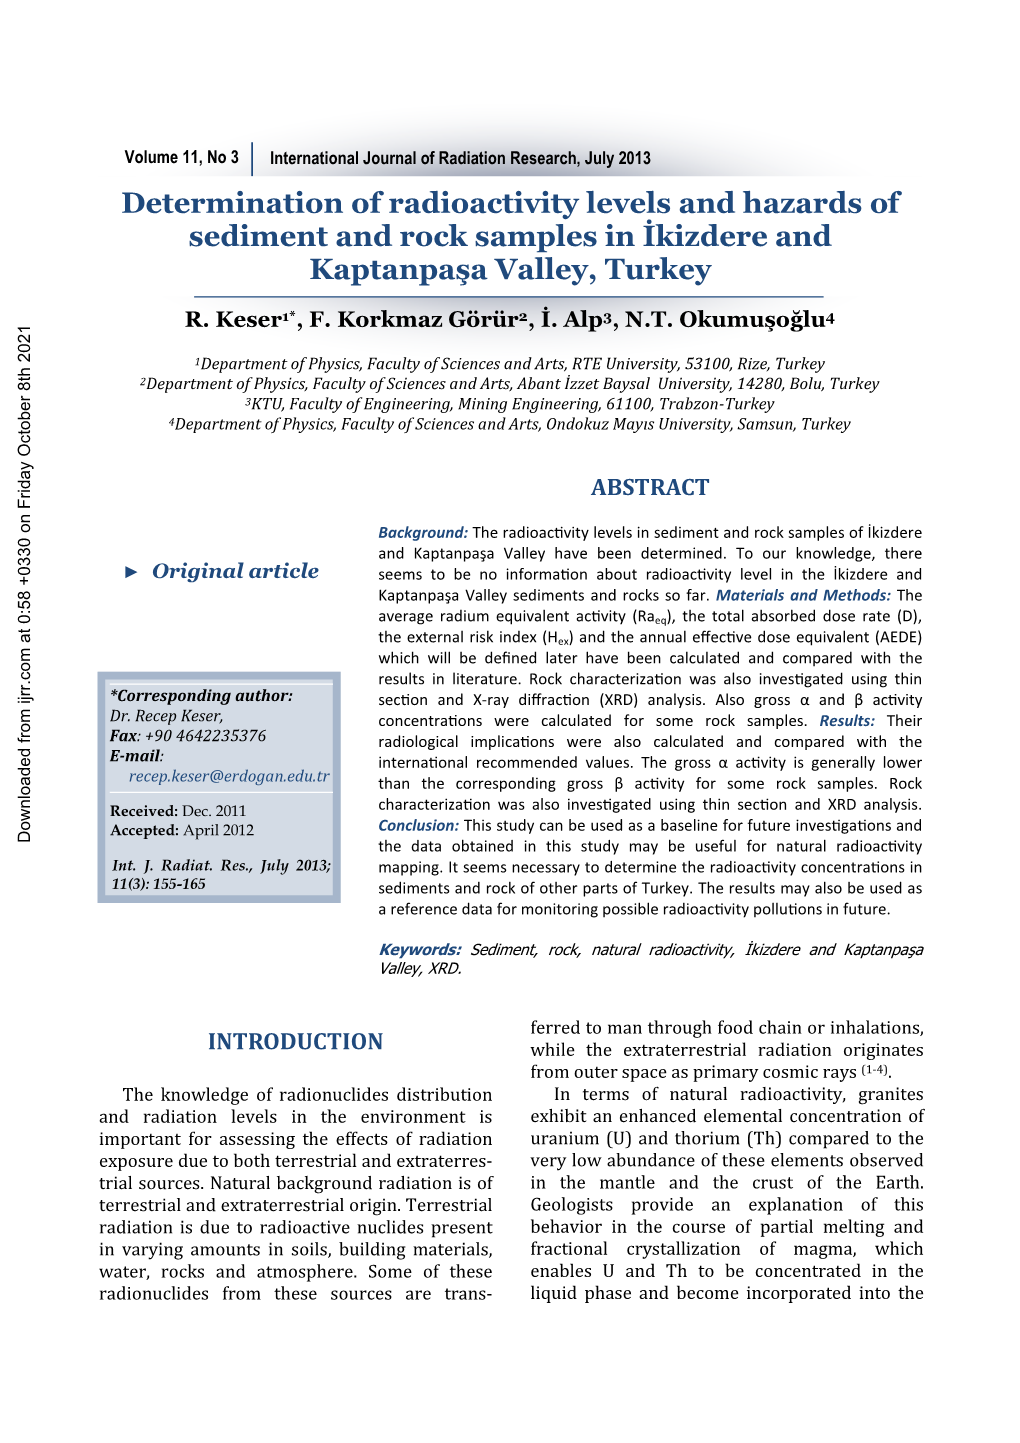 Determination of Radioactivity Levels and Hazards of Sediment and Rock Samples in İkizdere and Kaptanpa�A Valley, Turkey